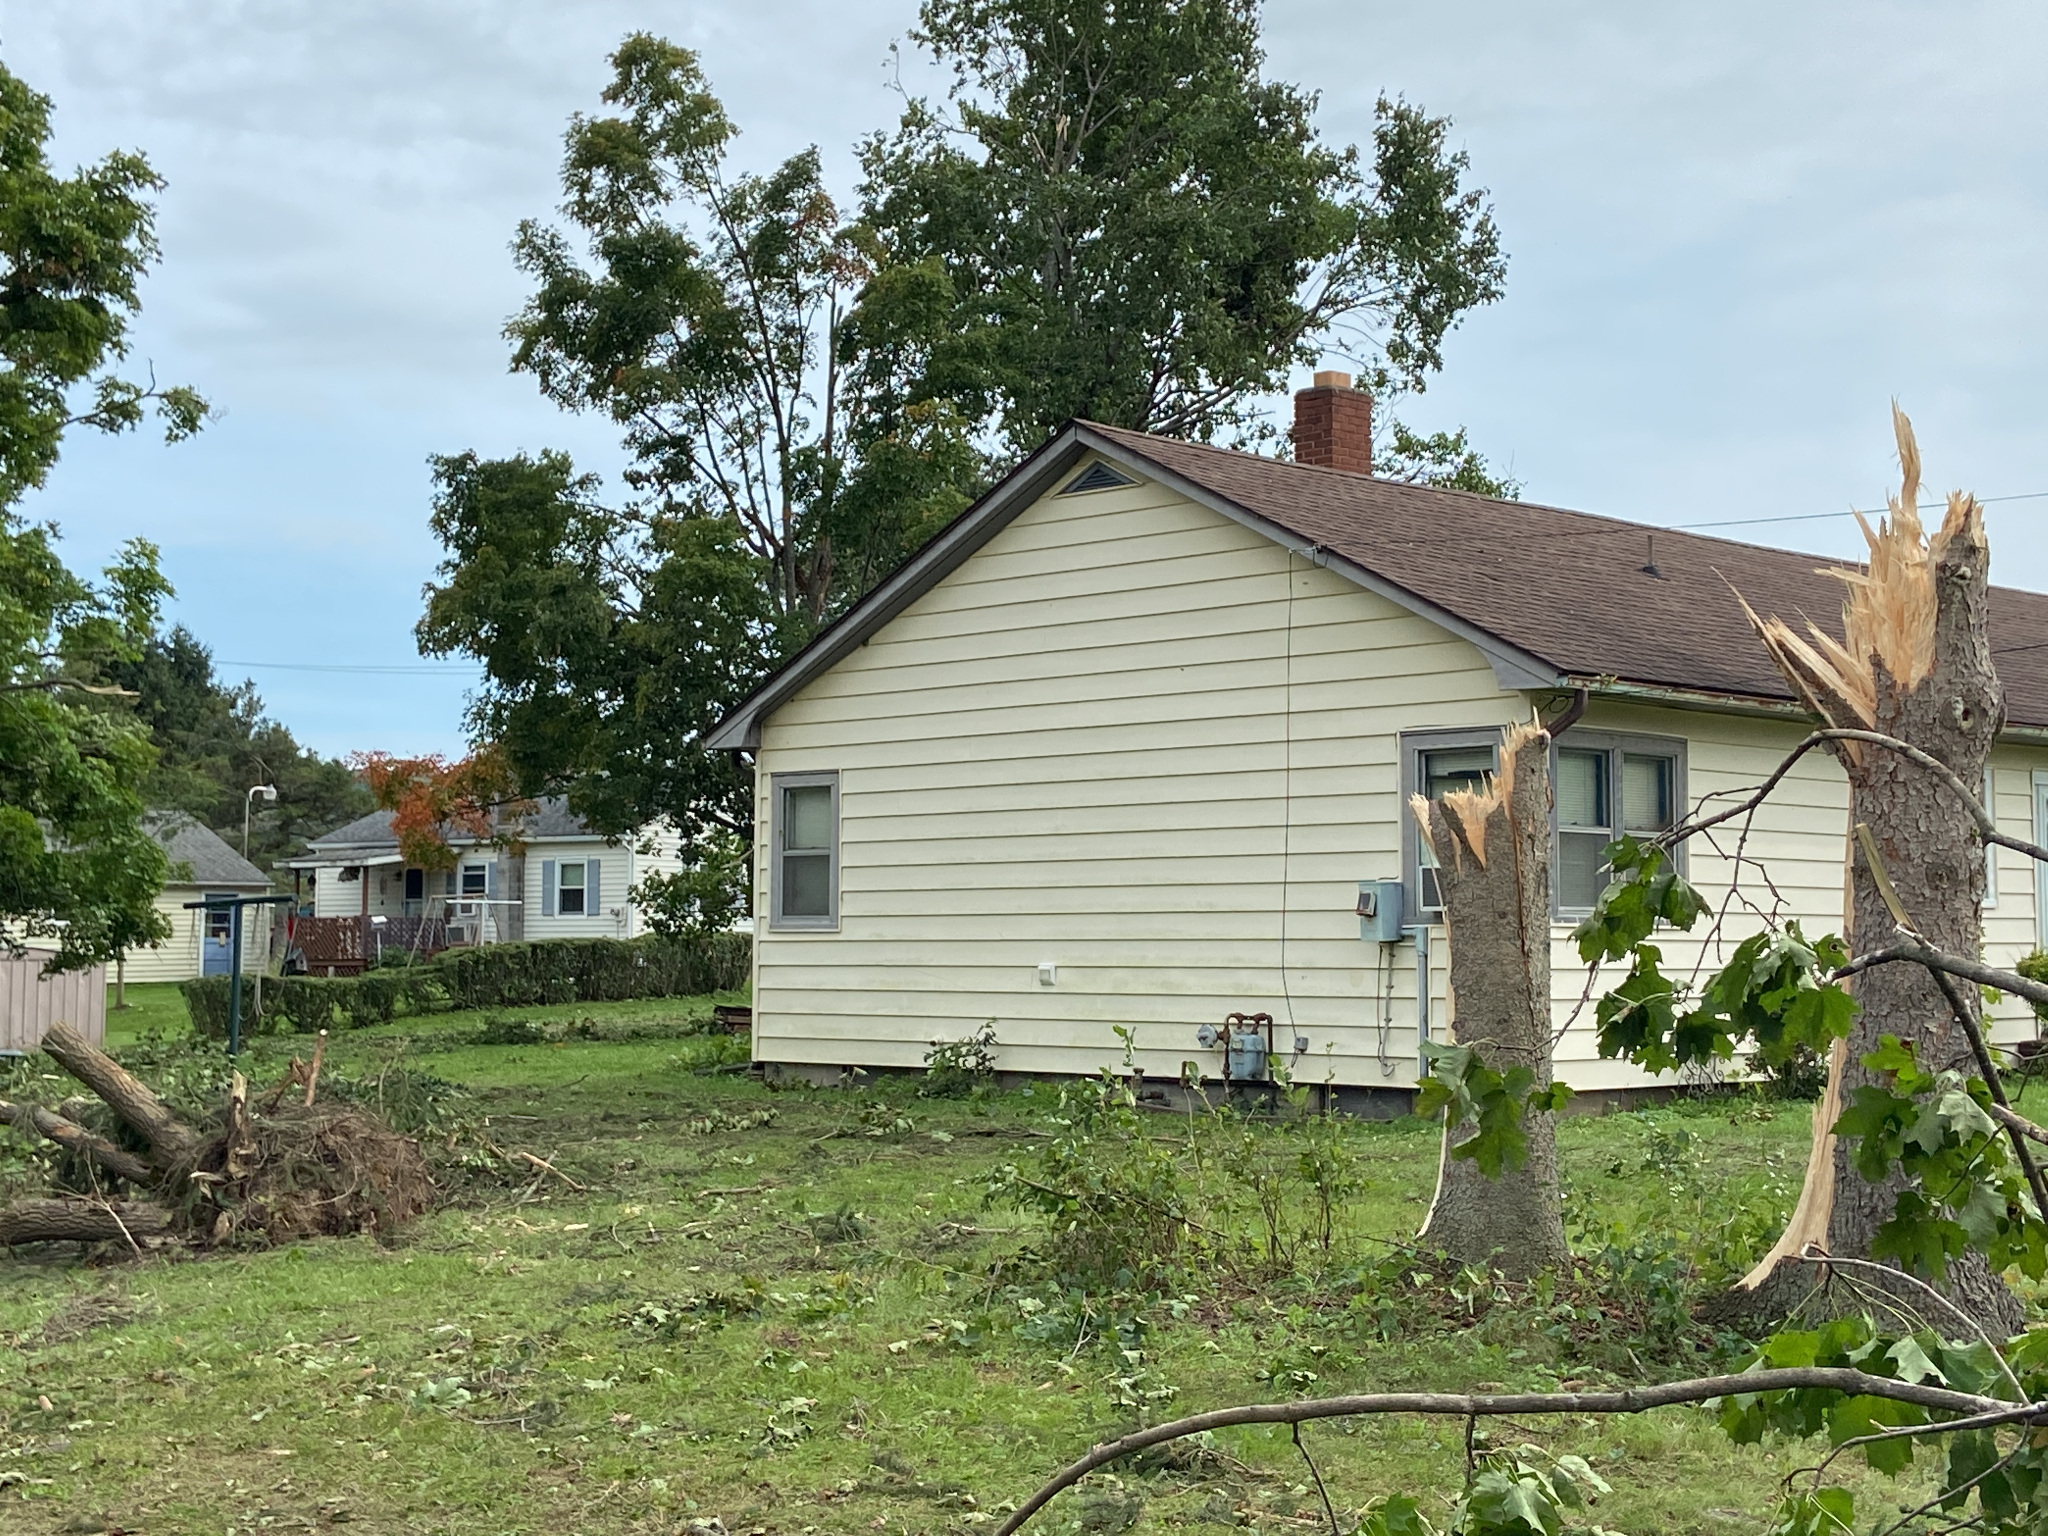 EF1 damage to houseand snapped trees.